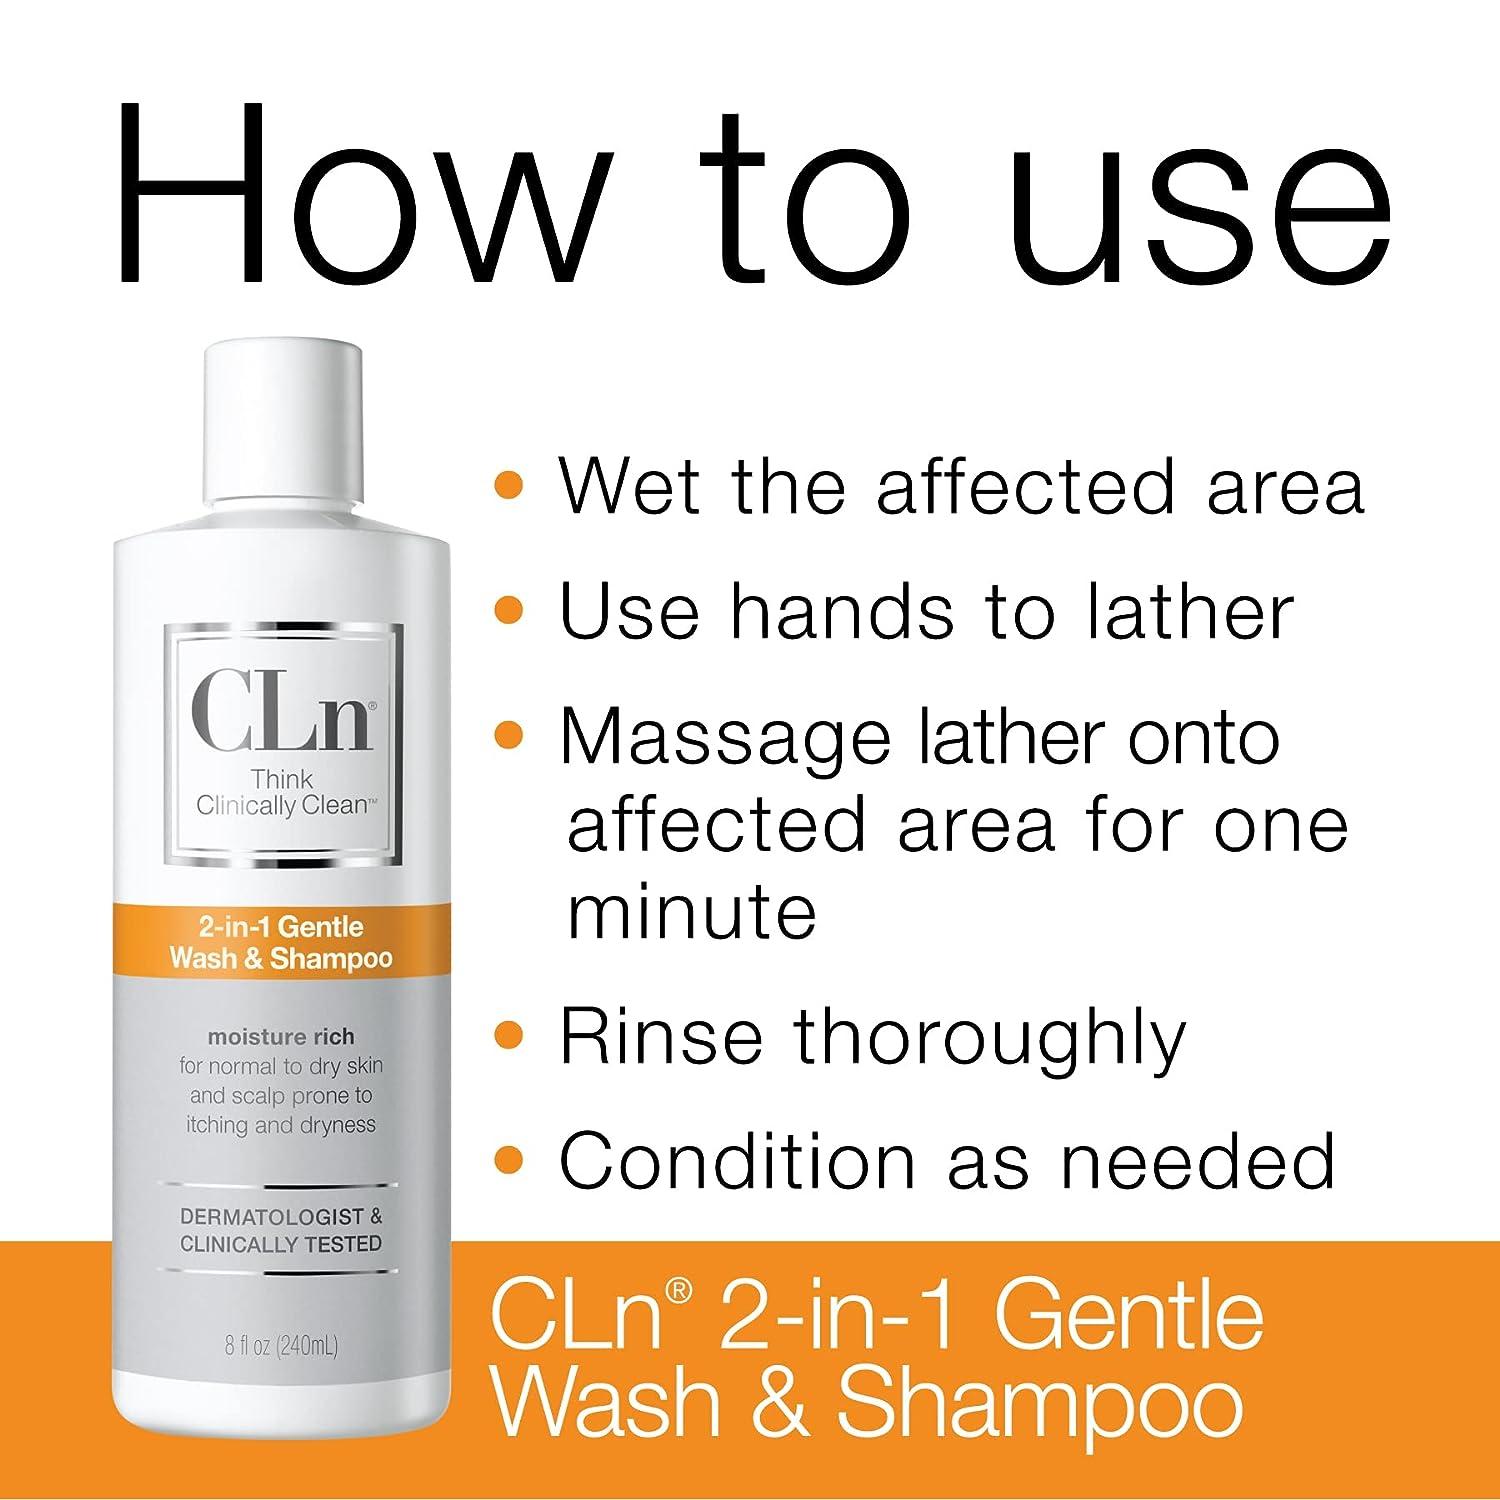 CLn 2-in-1 Gentle Wash & Shampoo - Multi-functional Cleanser with Glycerin  to Moisturize & Soothe Skin for Dry to Normal to Compromised Skin and Scalp  Prone to Redness Itching Dryness and Razor